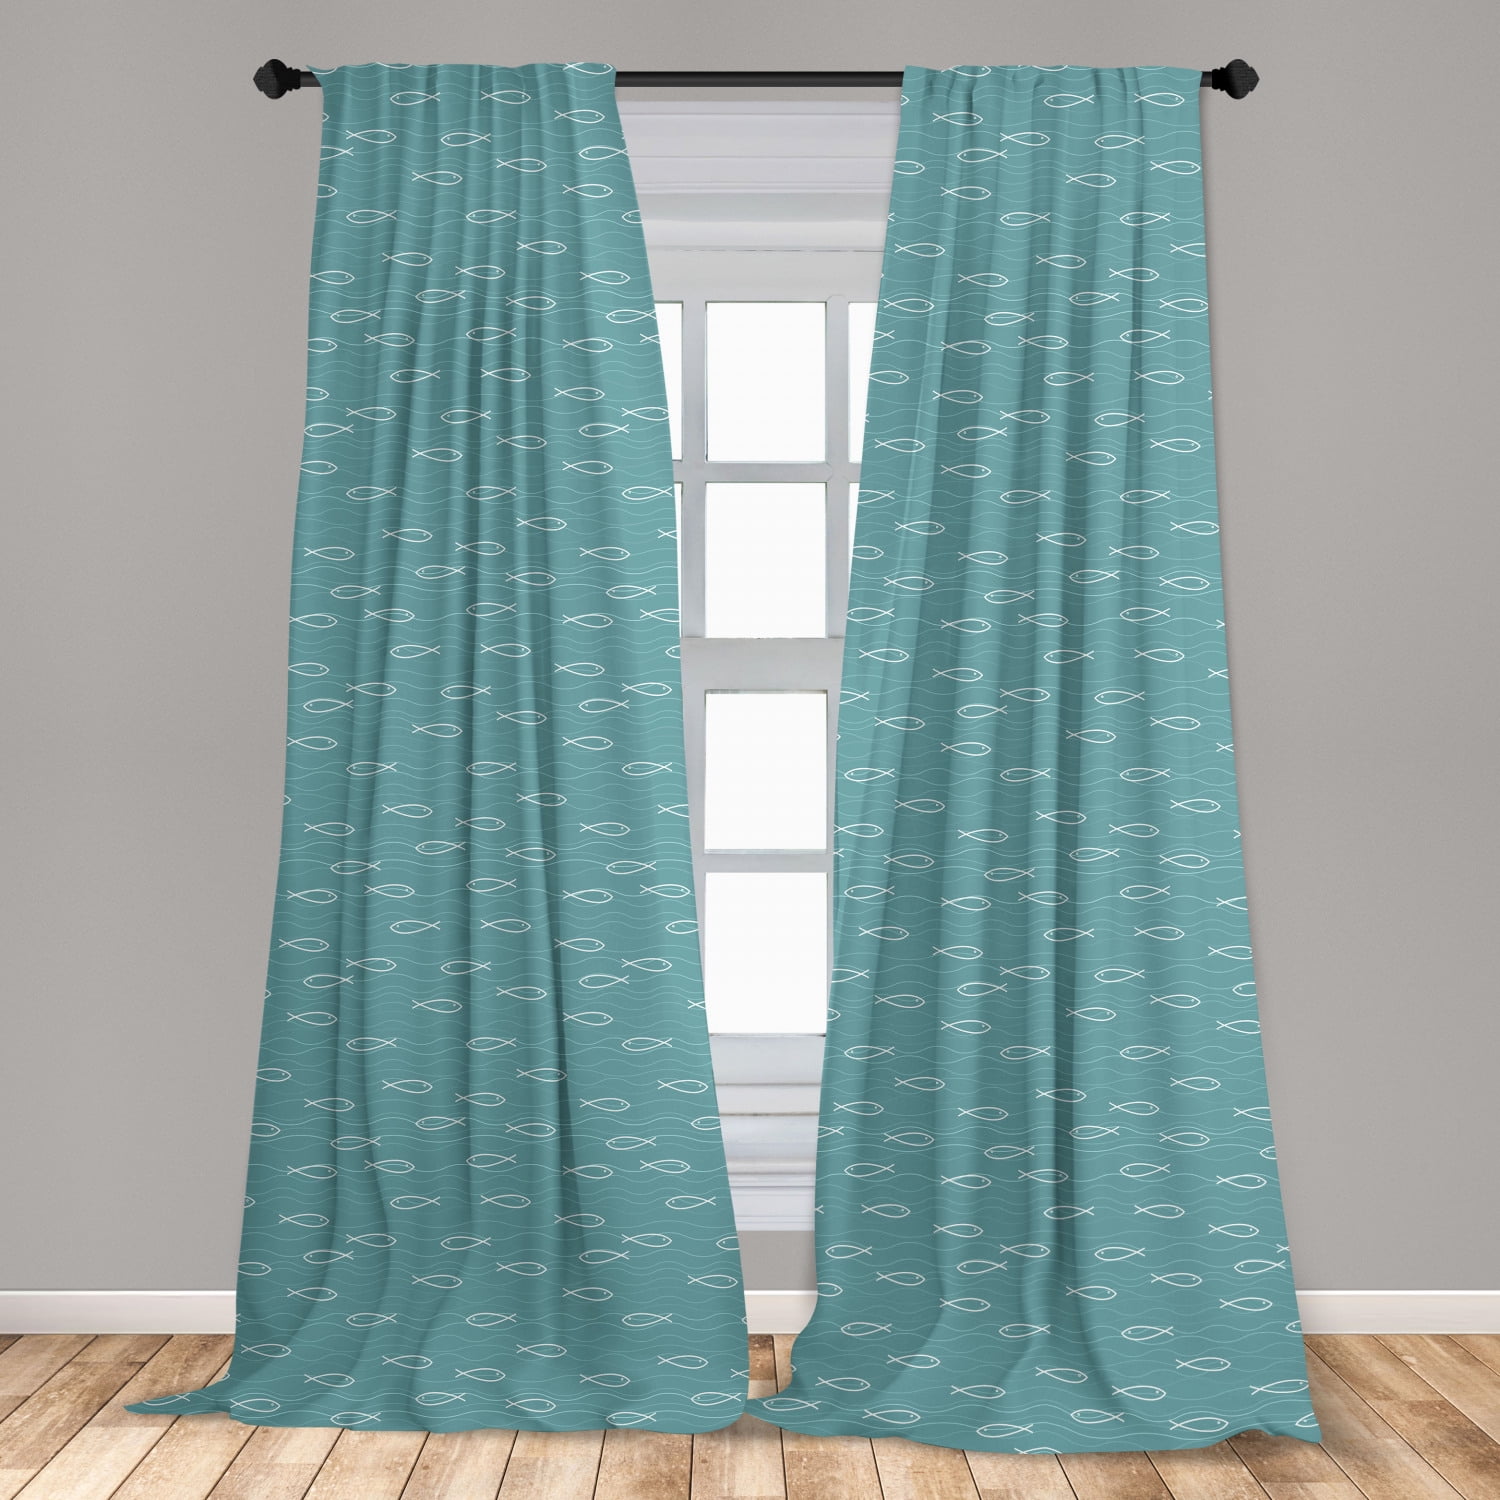 Color Transition Printed Curtain  Drapes For Living Room Dining Room Bed Room With 2 Panel Set Multiple Sized Waves Ocean Sea Nature Abst